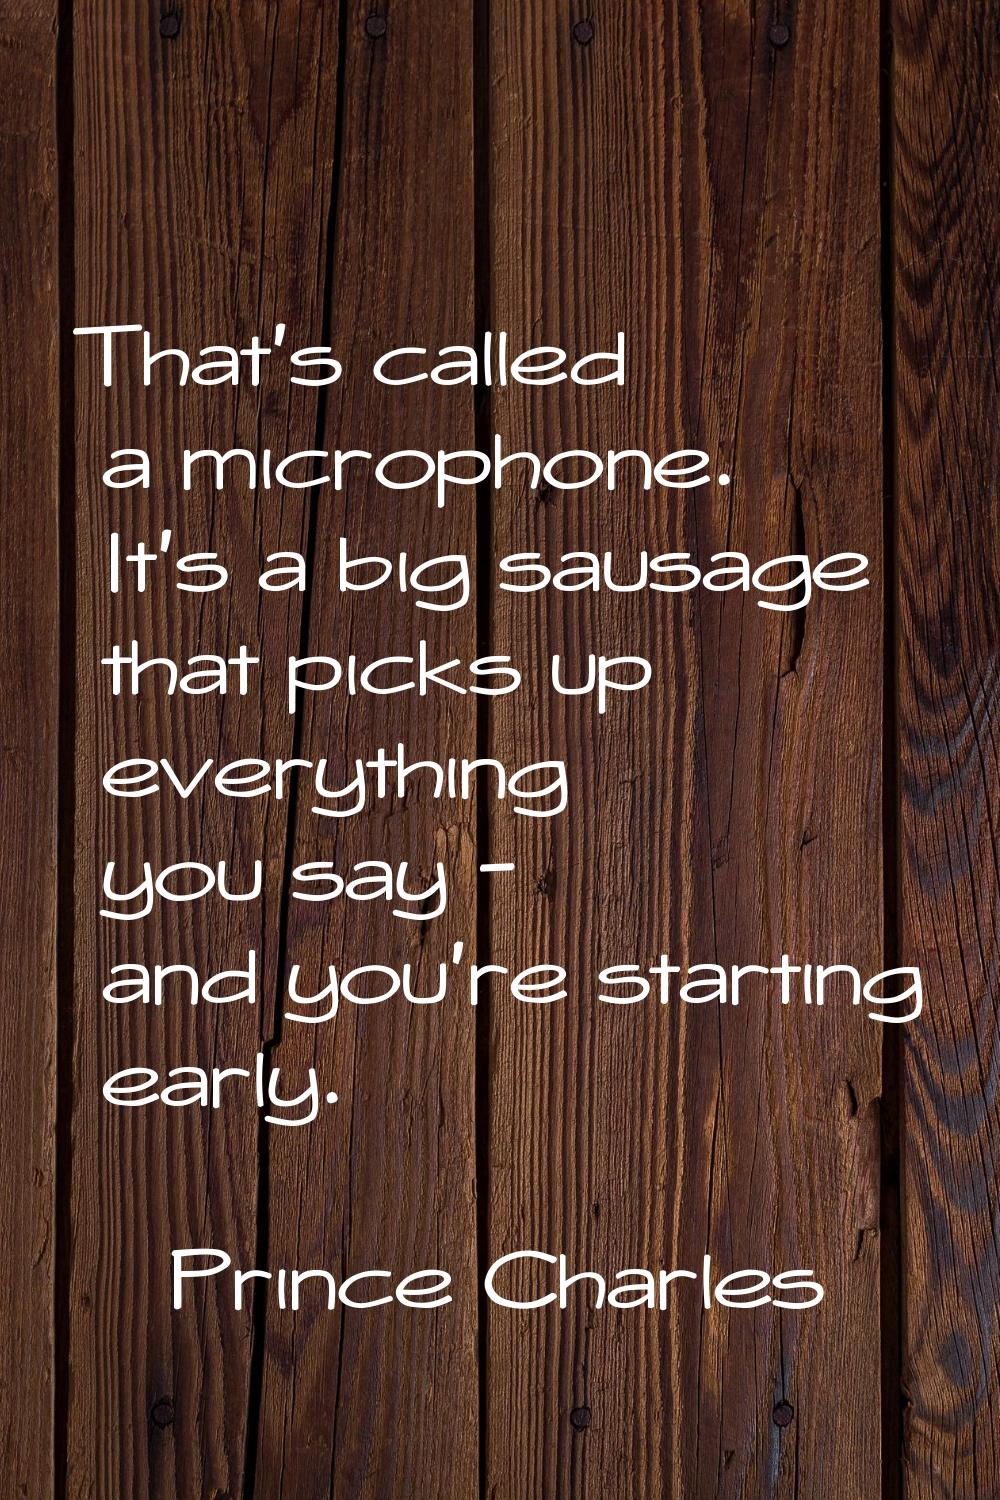 That's called a microphone. It's a big sausage that picks up everything you say - and you're starti